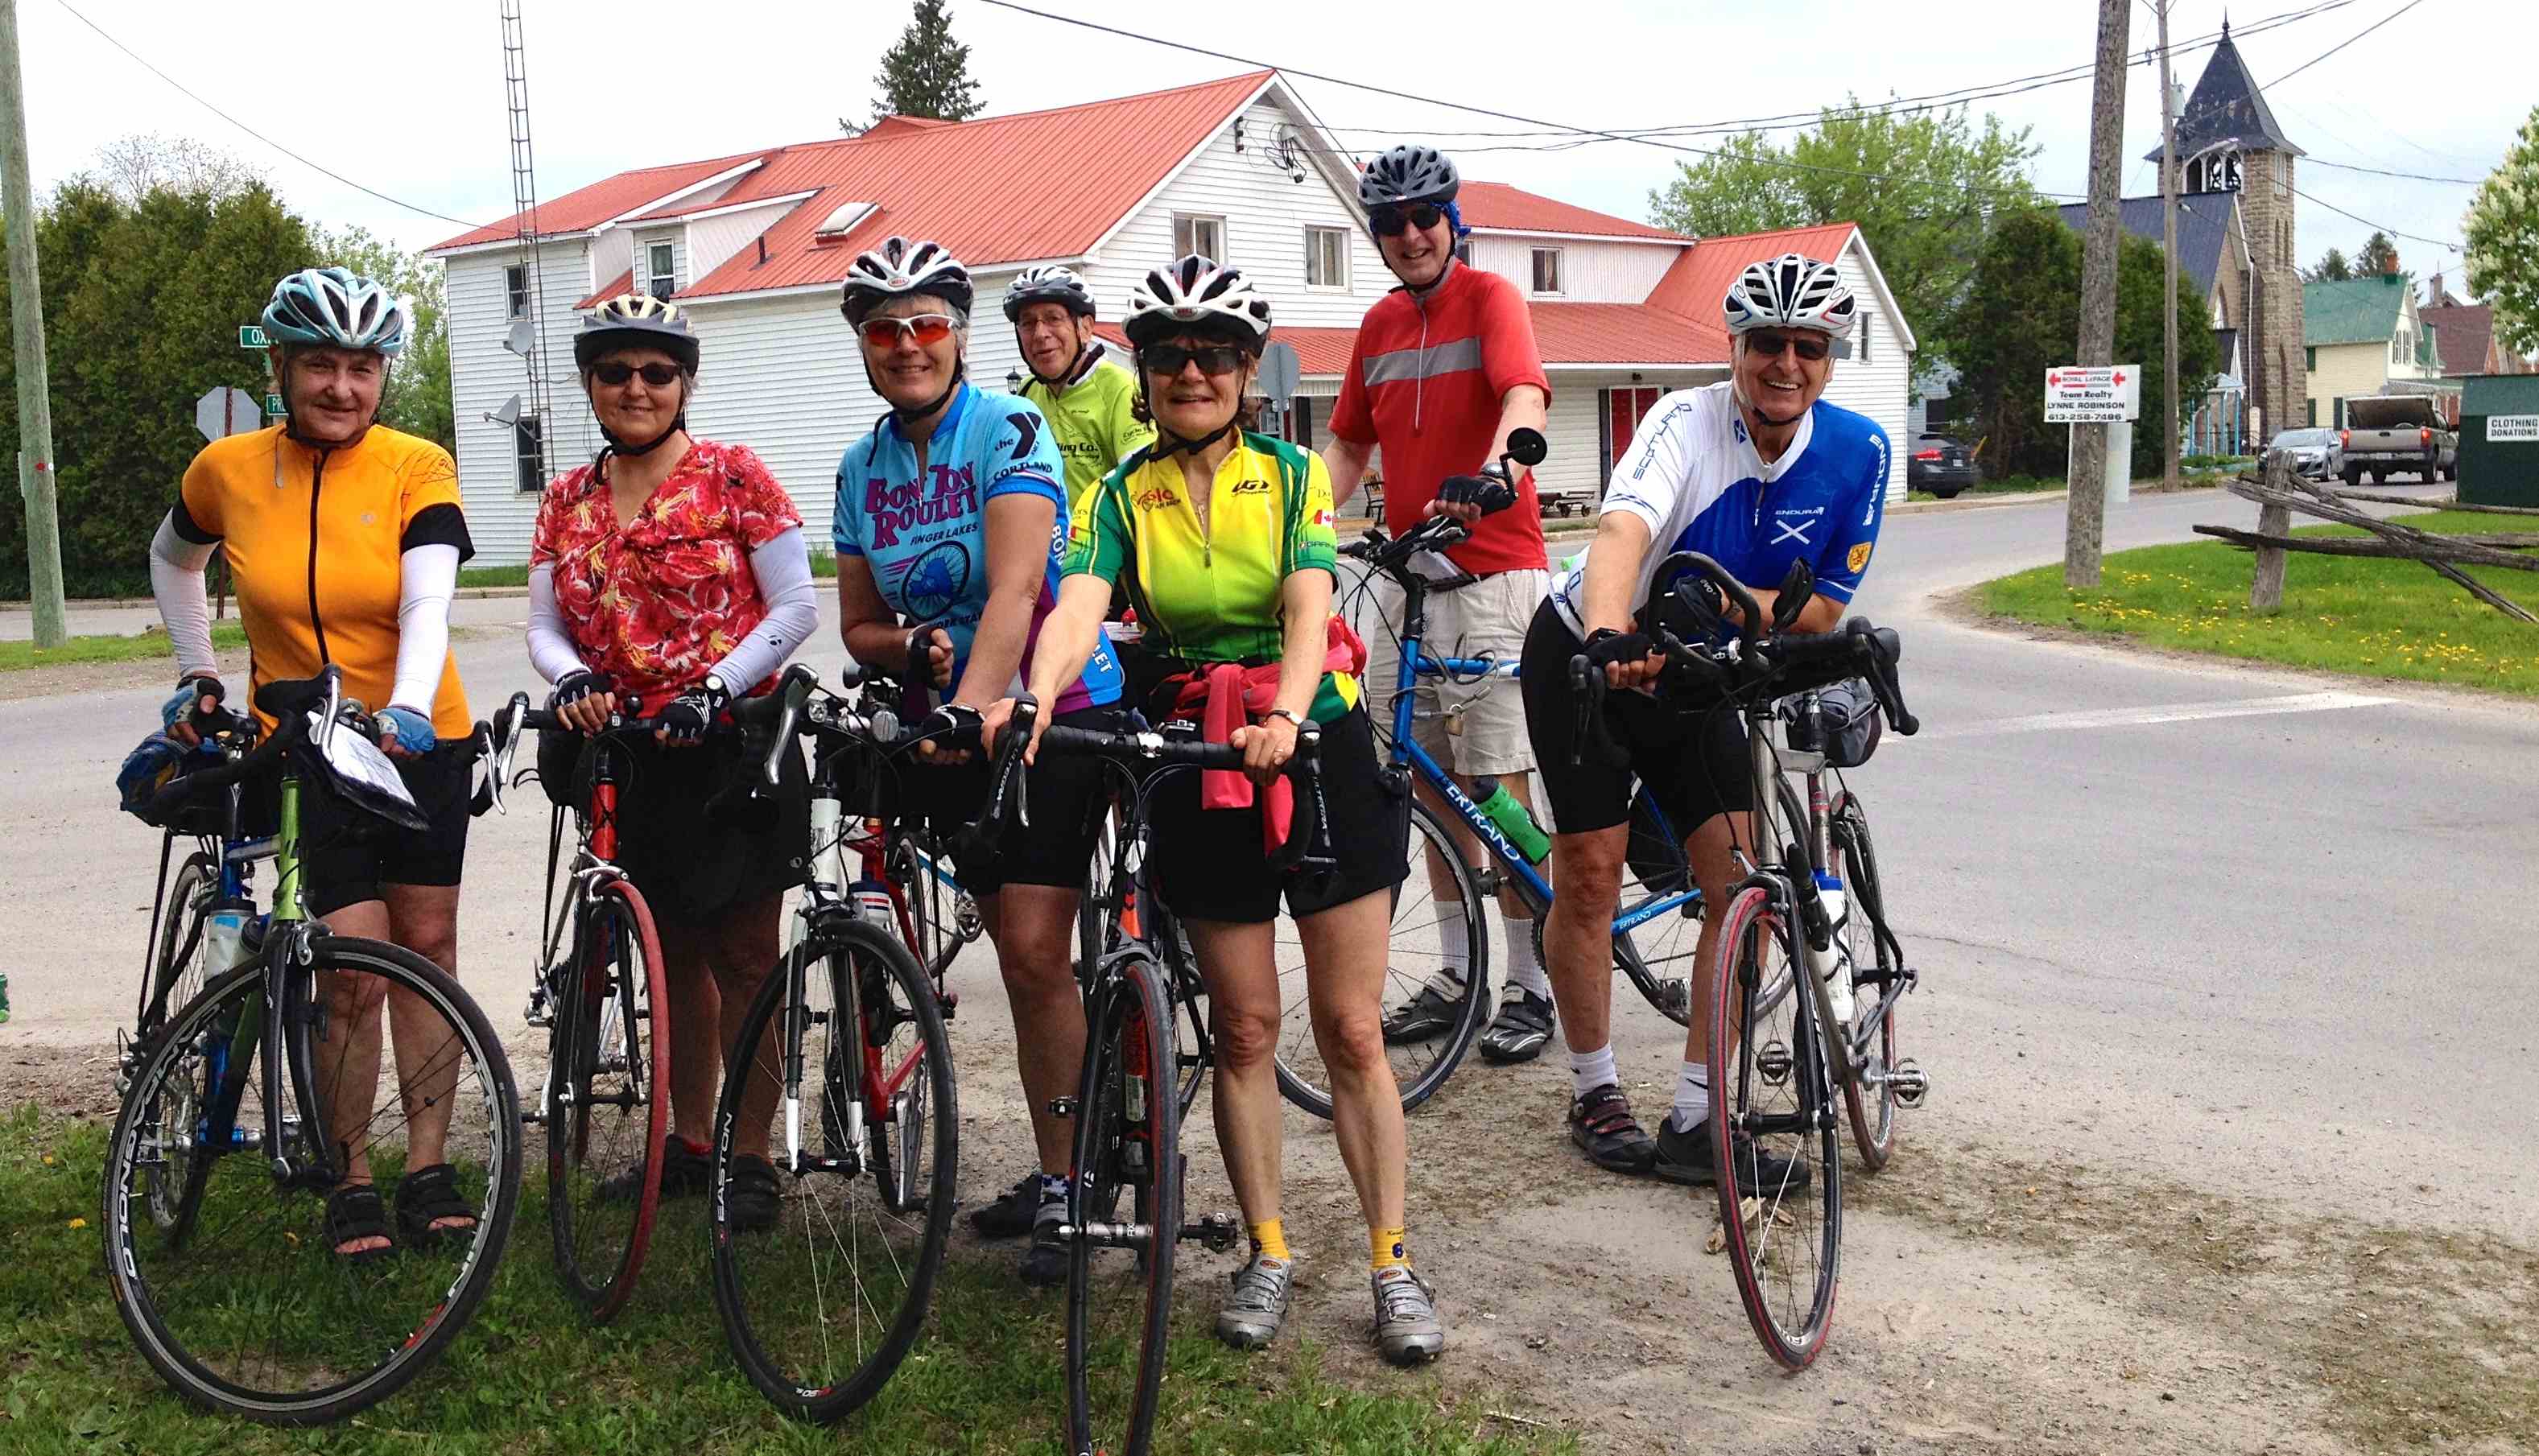 7 cyclists line up for a photo in Bishops Mills, North Grenville as part of MS Bike